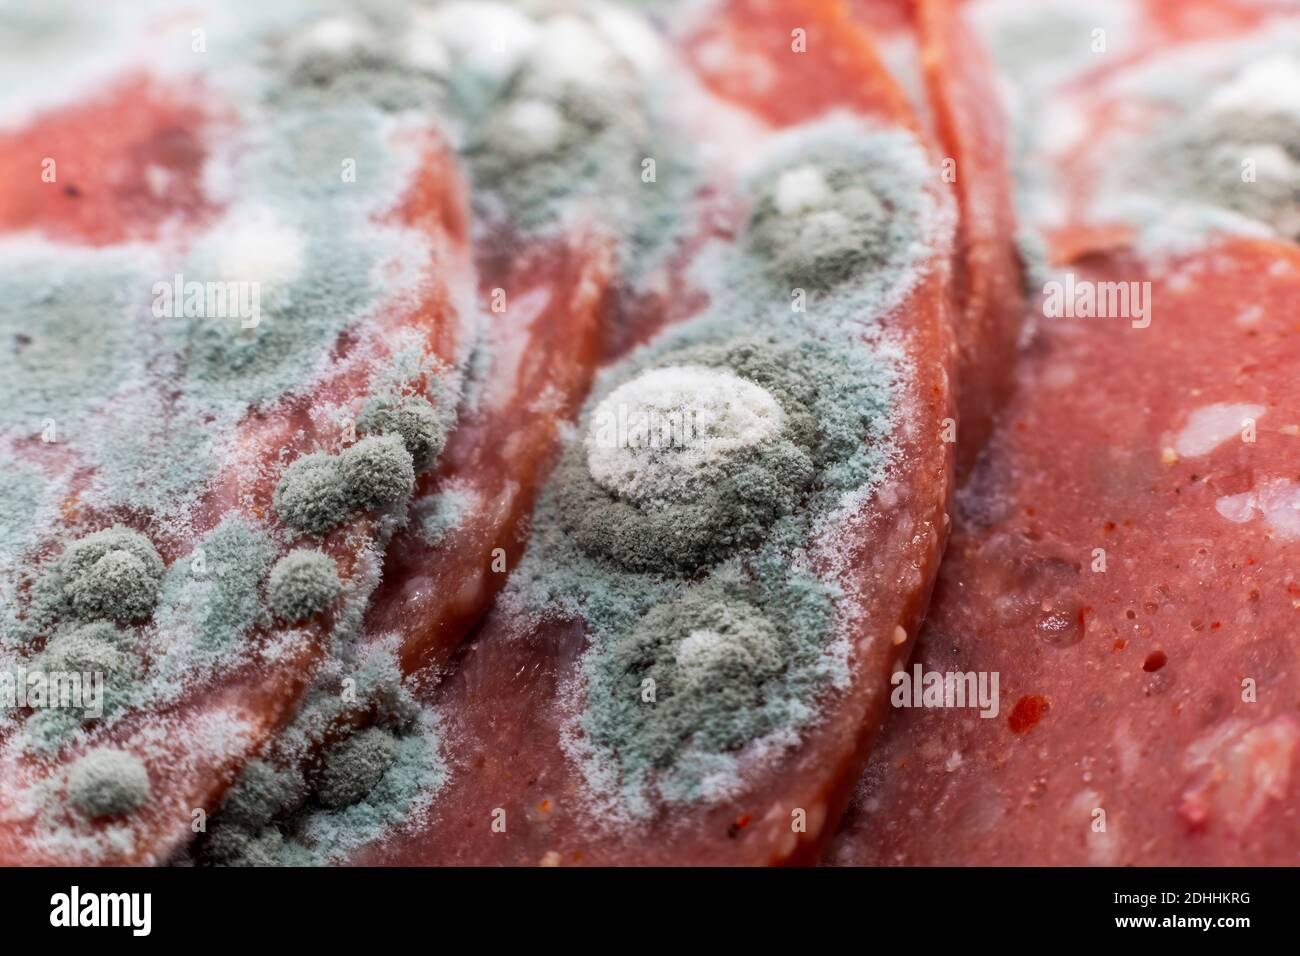 Pieces of sliced meat decaying with mold and fungus growth Stock Photo